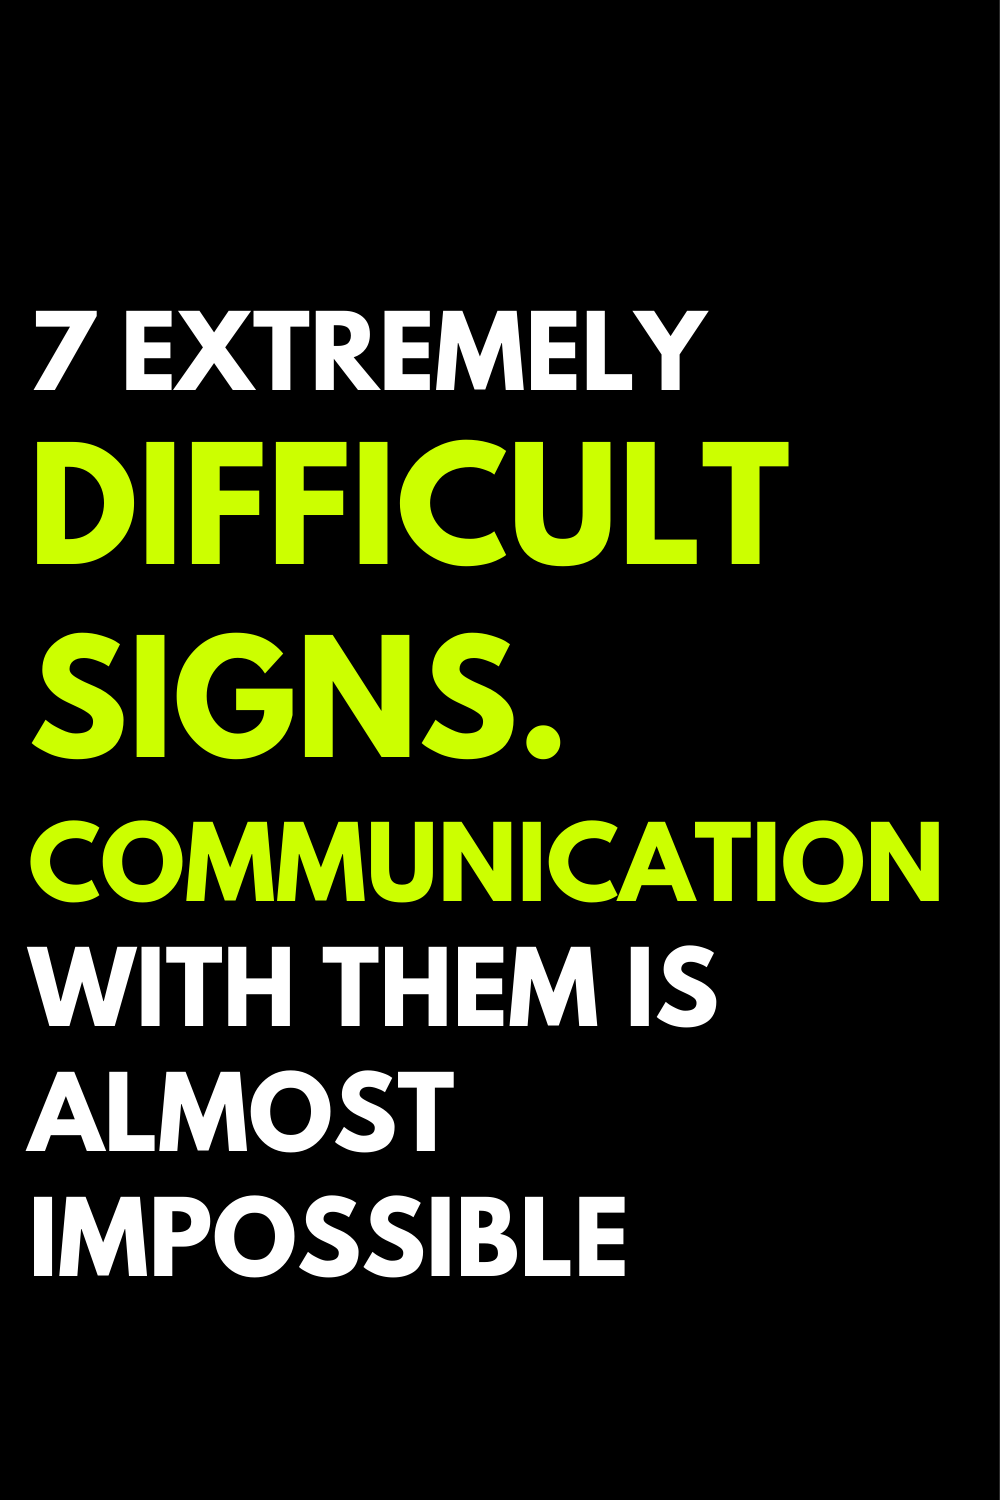 7 extremely difficult signs. Communication with them is almost impossible